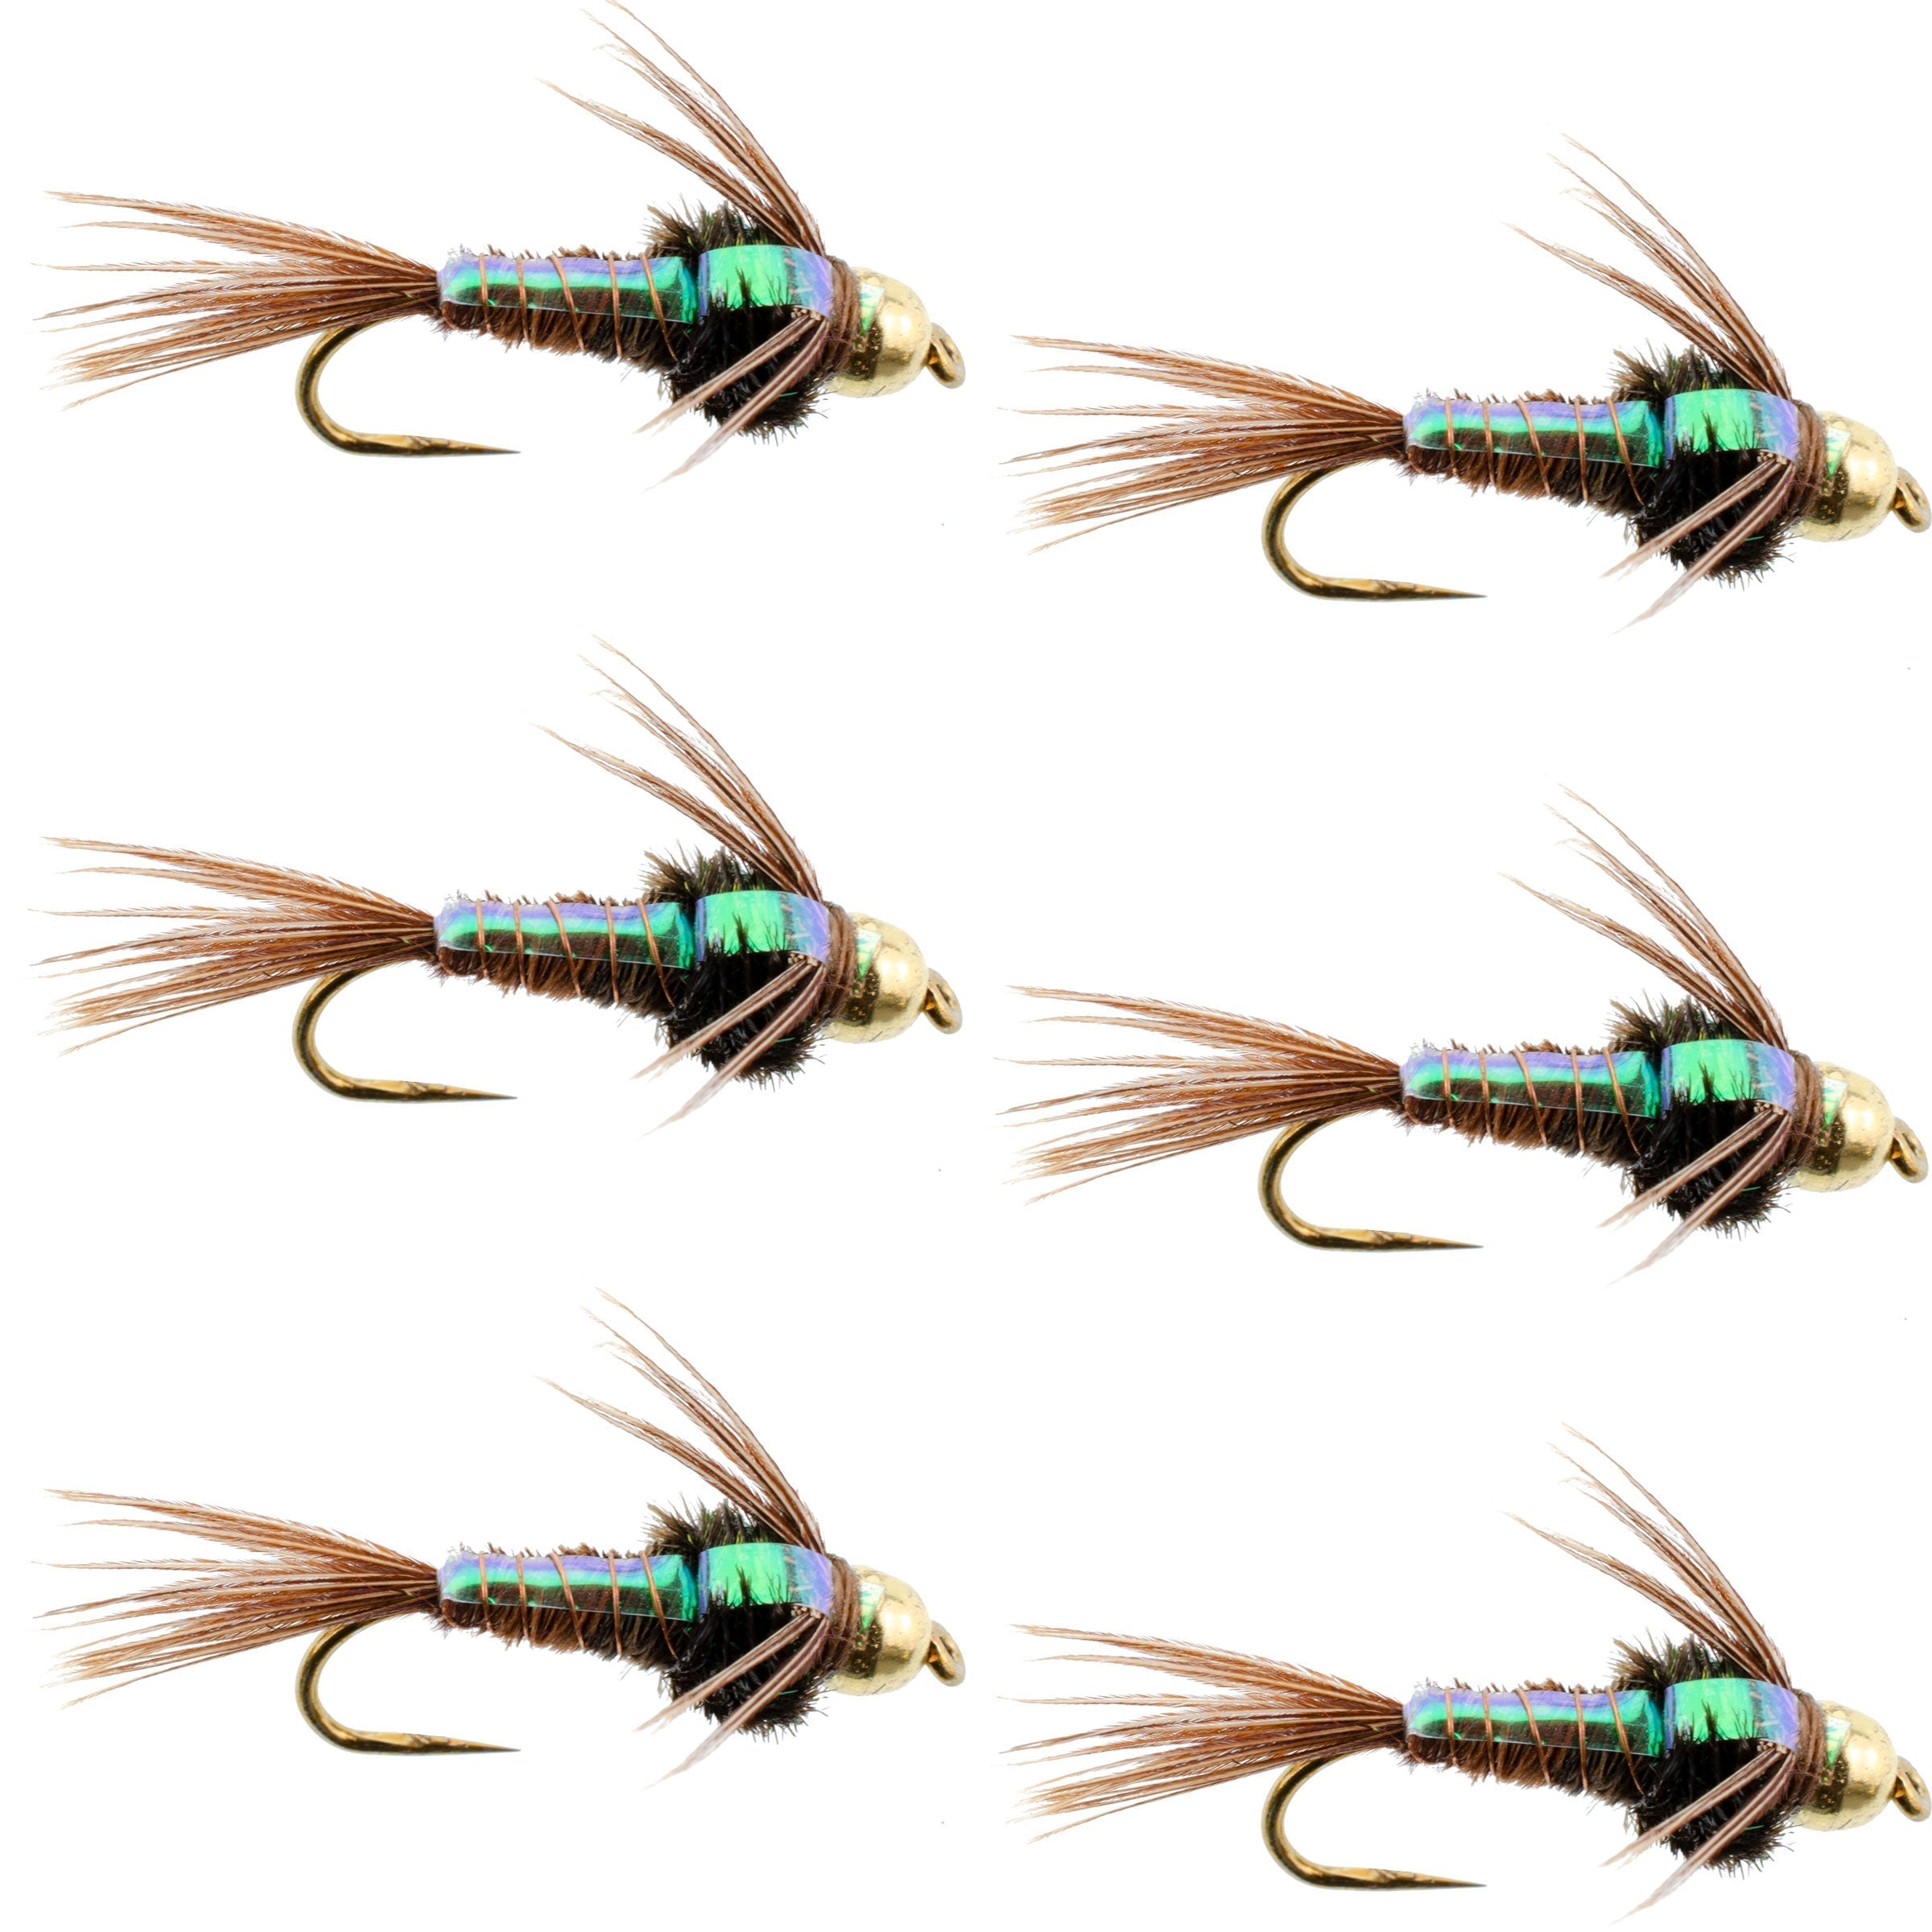 Barbless Bead Head Flashback Pheasant Tail Nymph Fly 6 Flies Hook Size 18